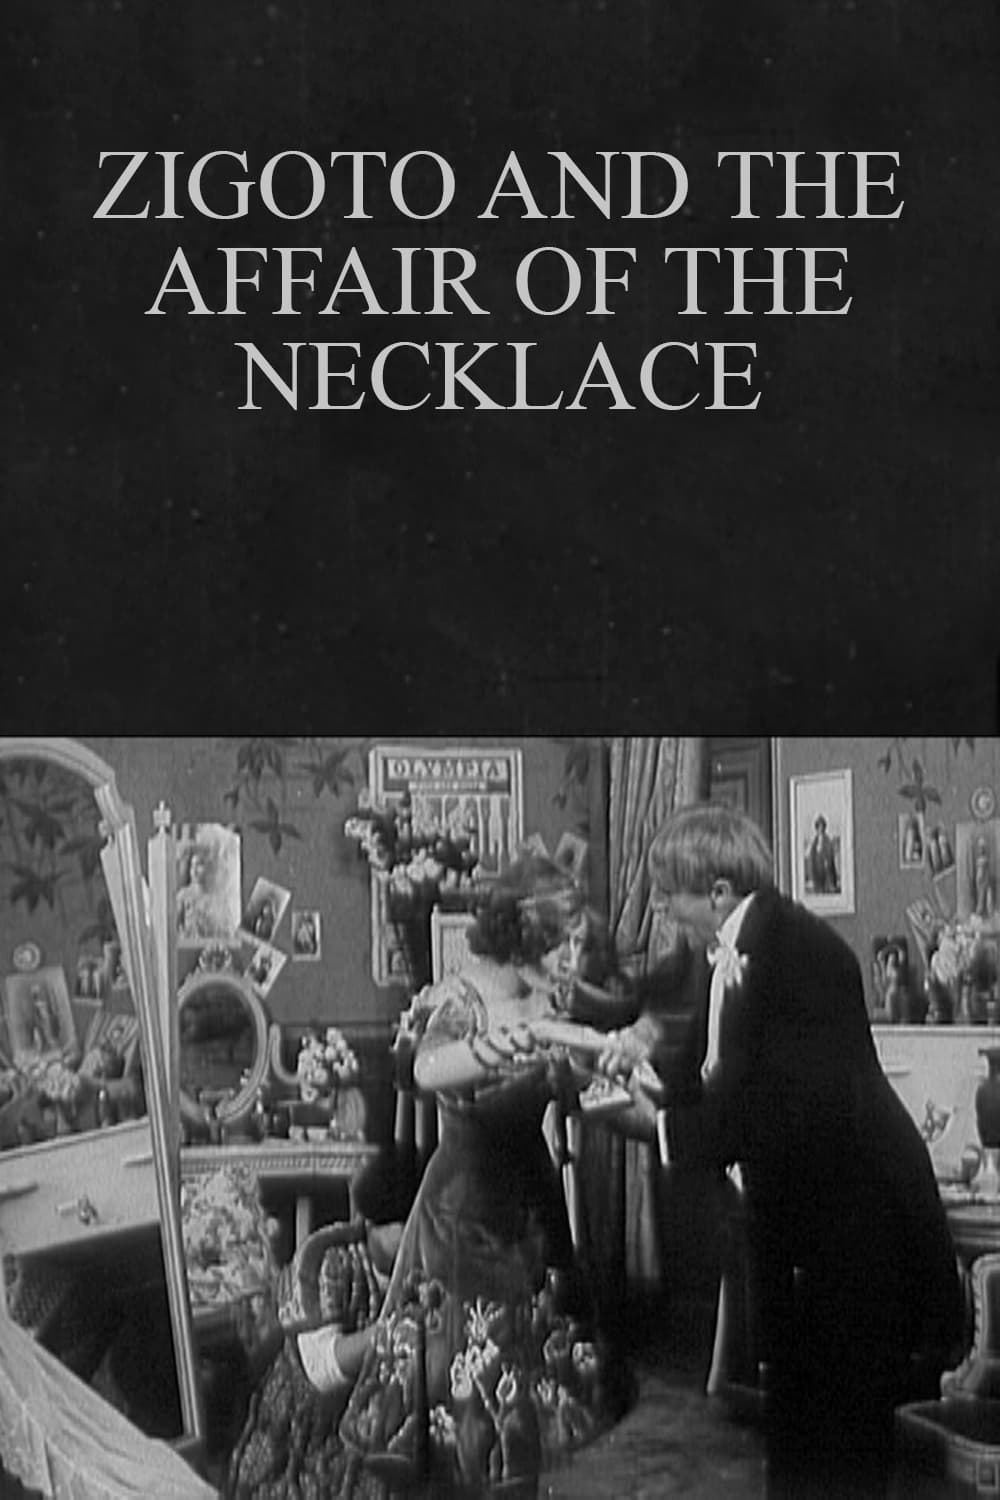 Zigoto and the Affair of the Necklace